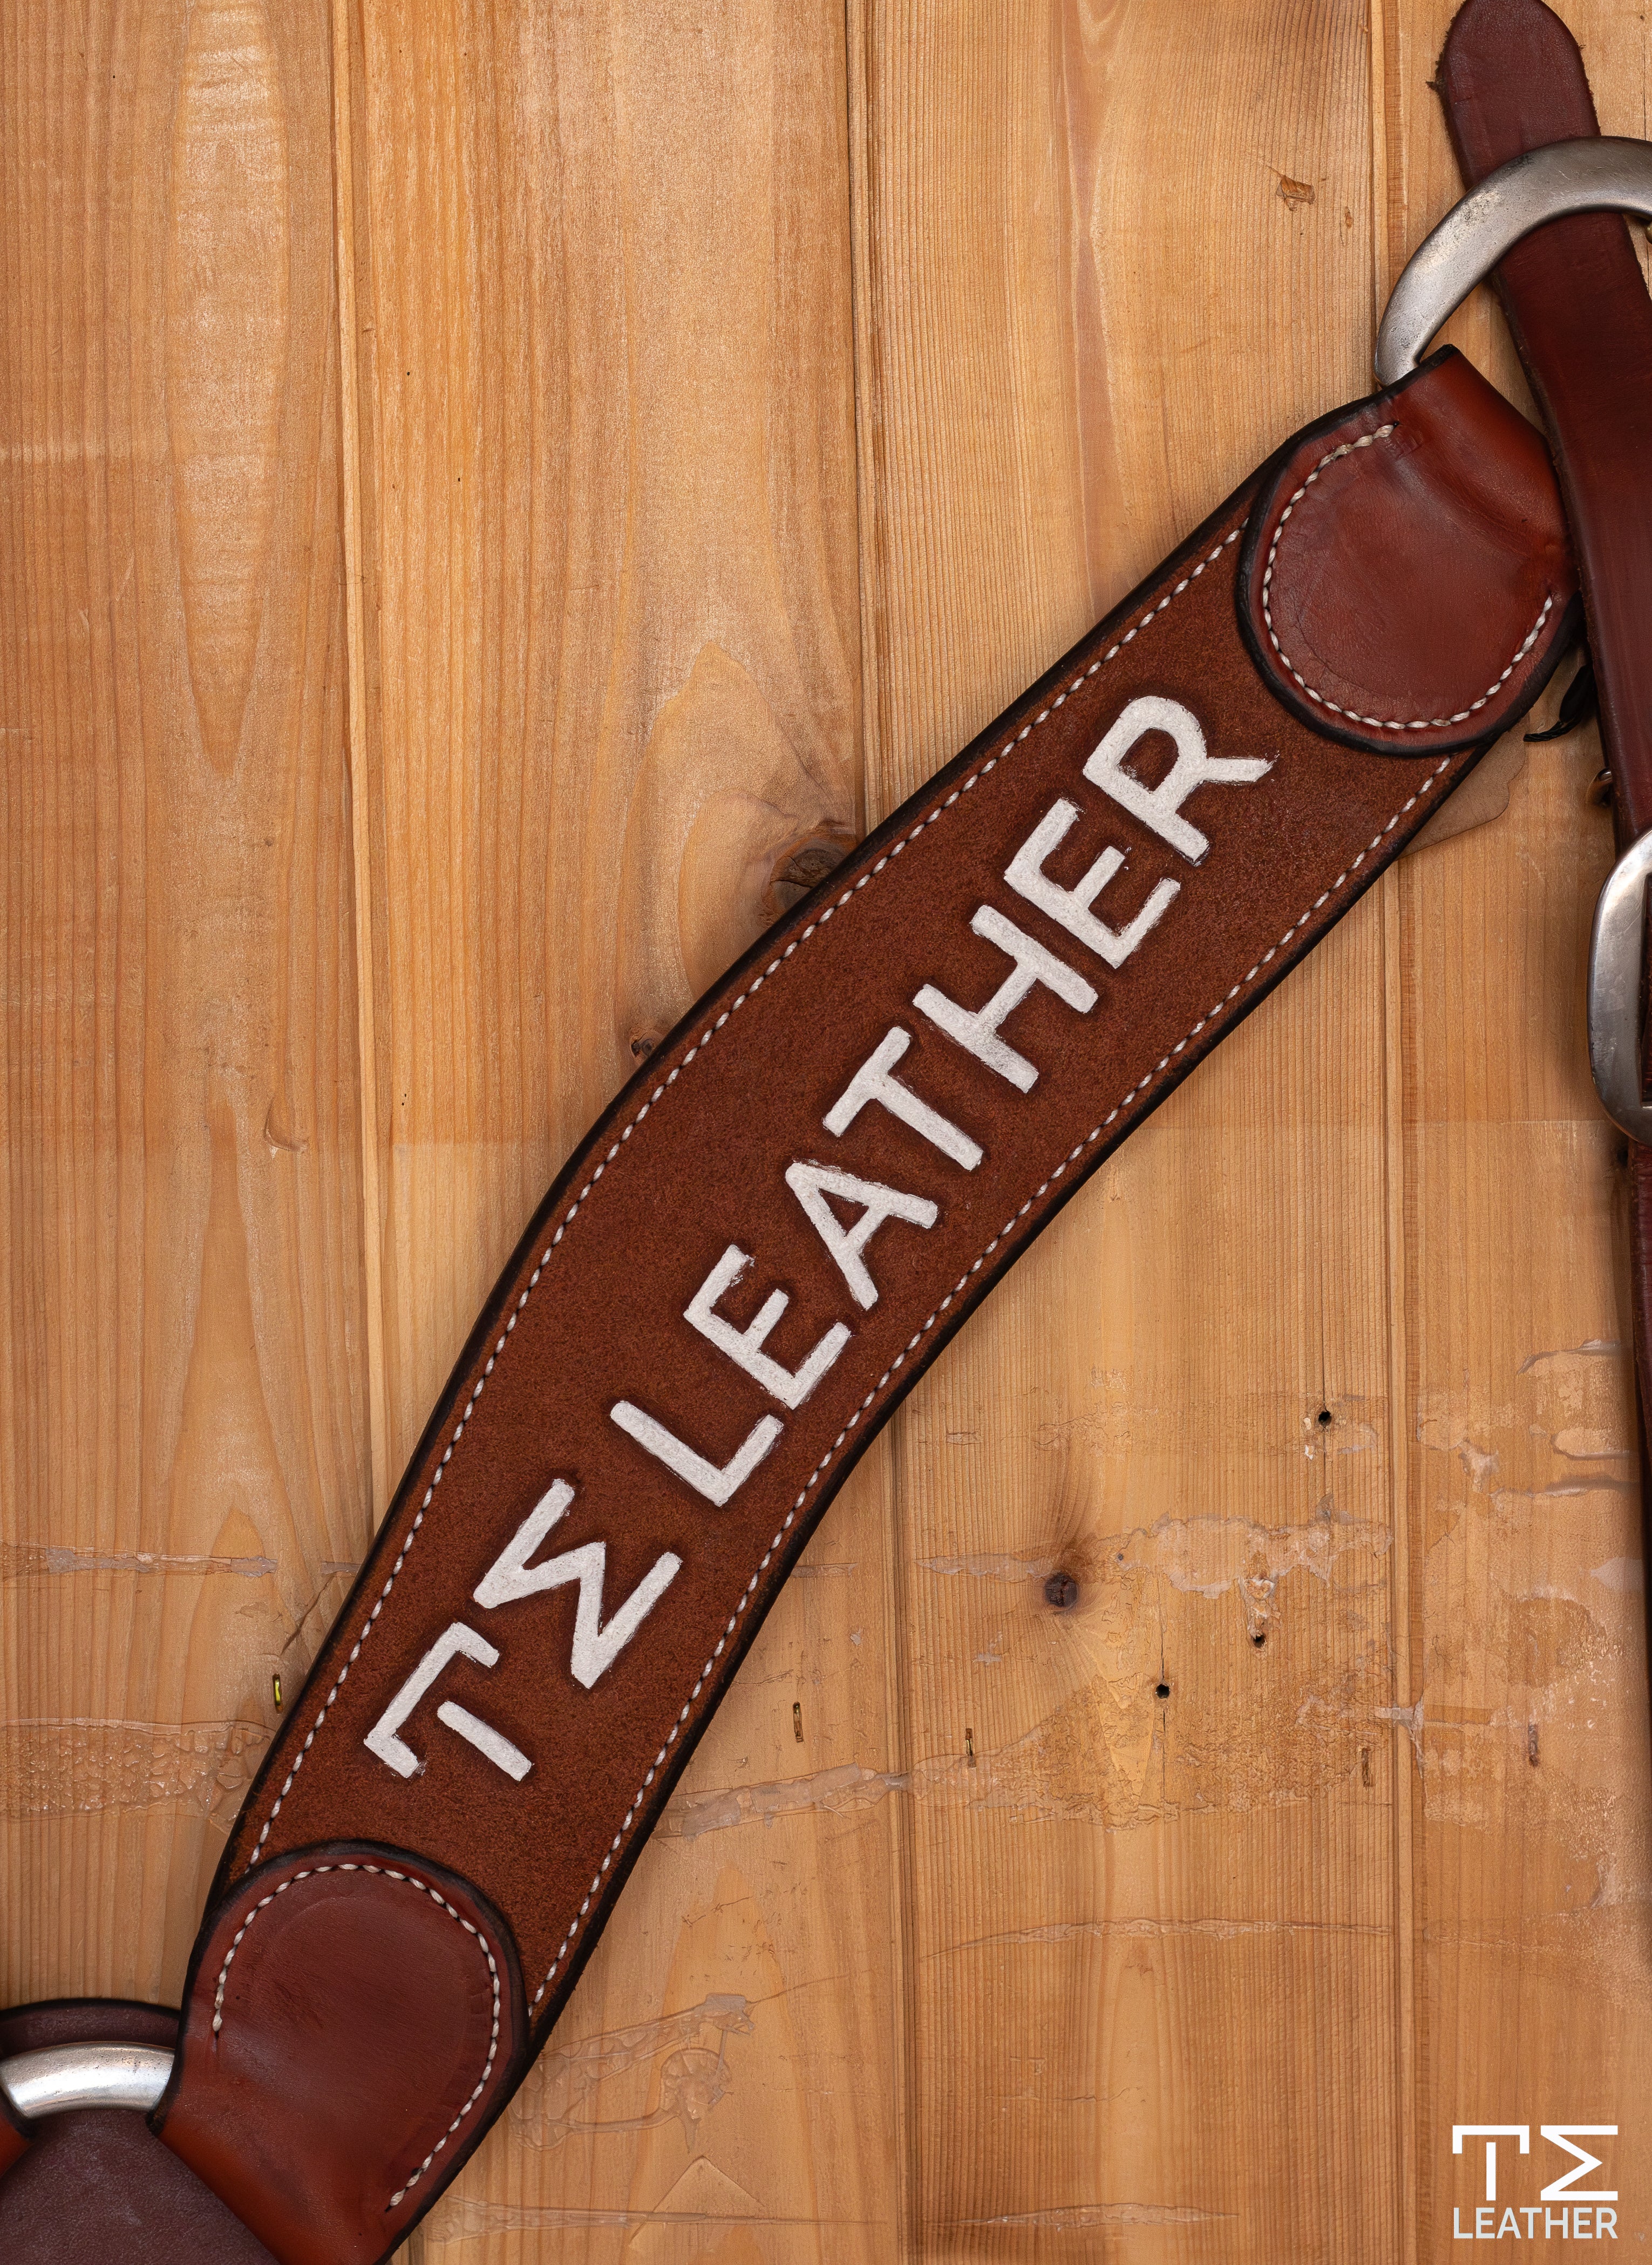 2.5" TM LEATHER Natural Roughout Three Piece Roper Breast Collar w/ White Lettering